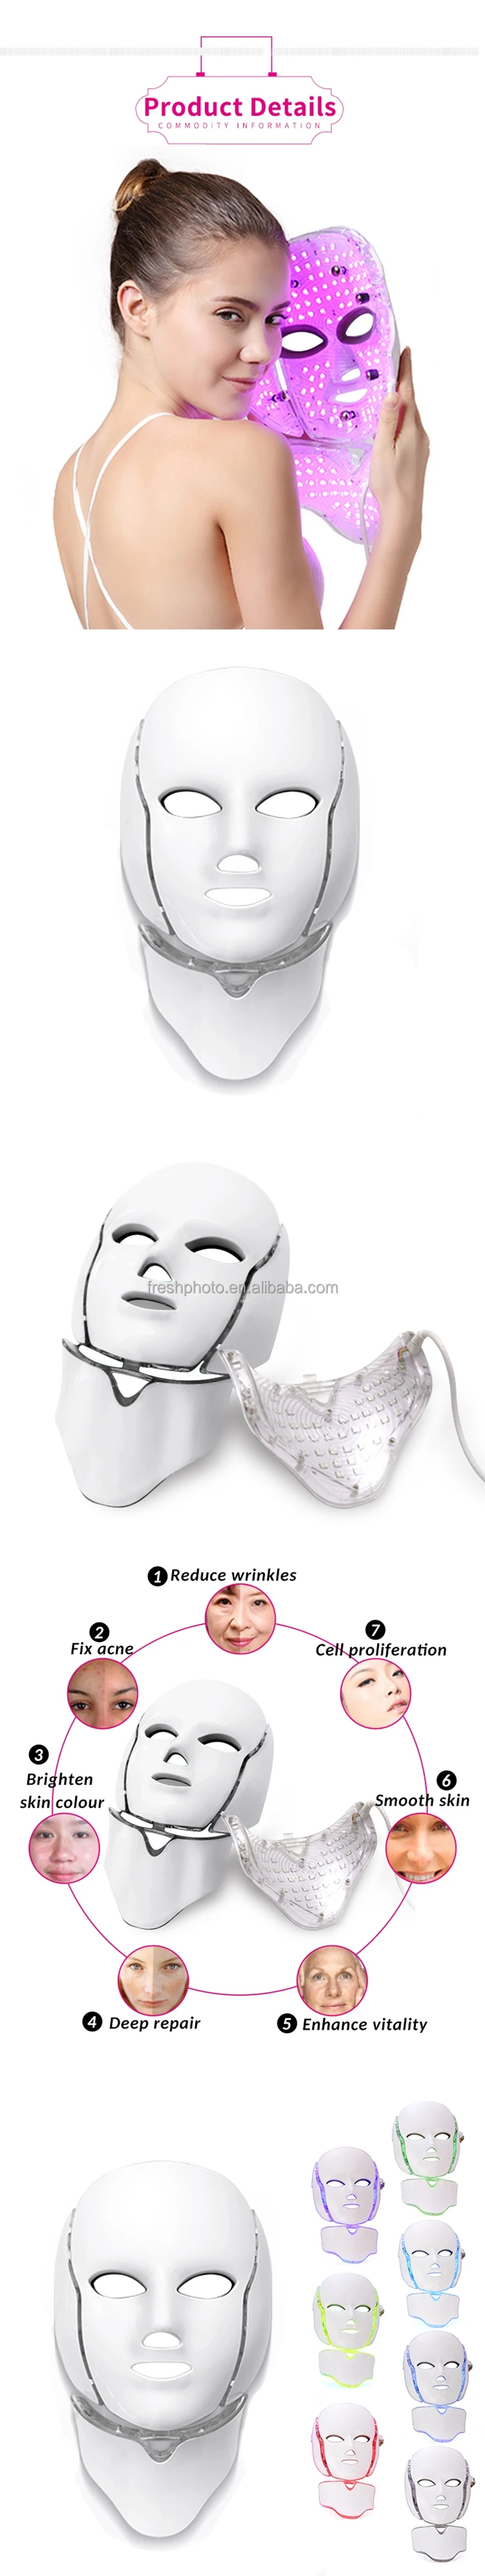 led therypy mask 9.jpg